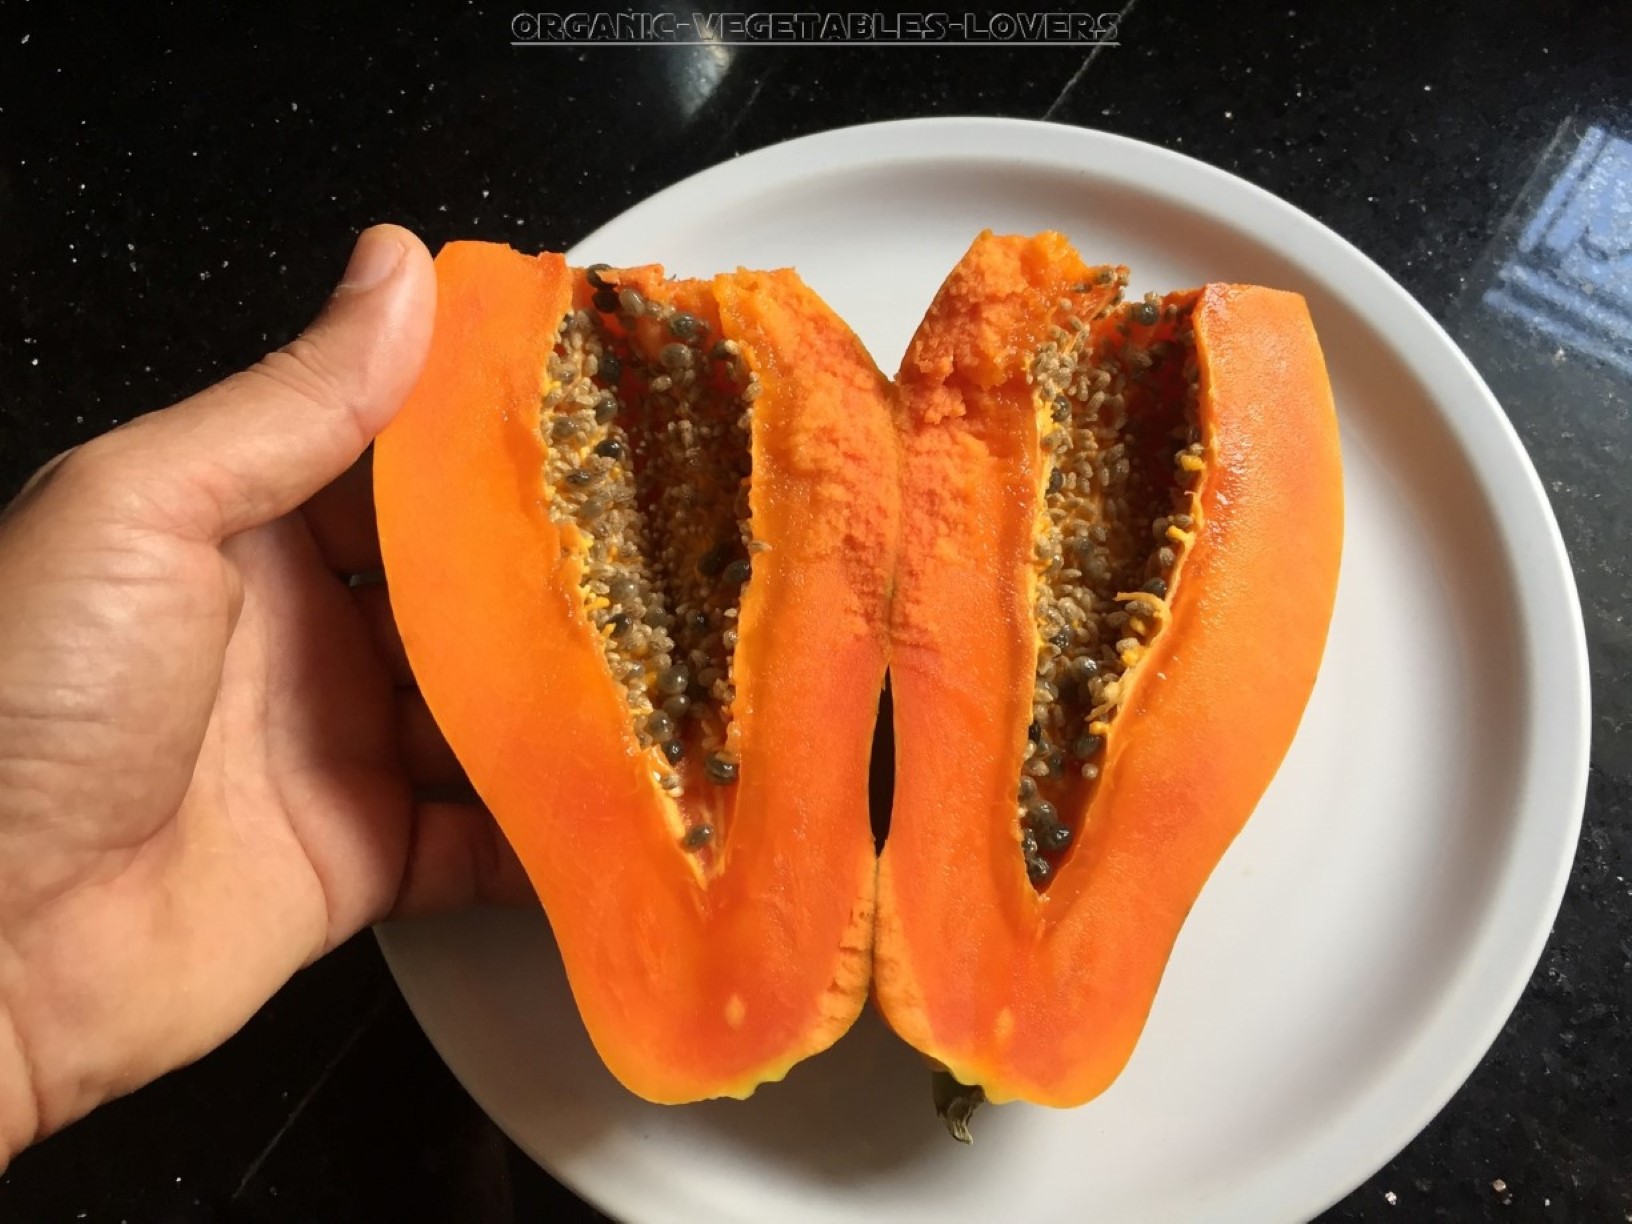 You can use any shop bought papaya for seeds